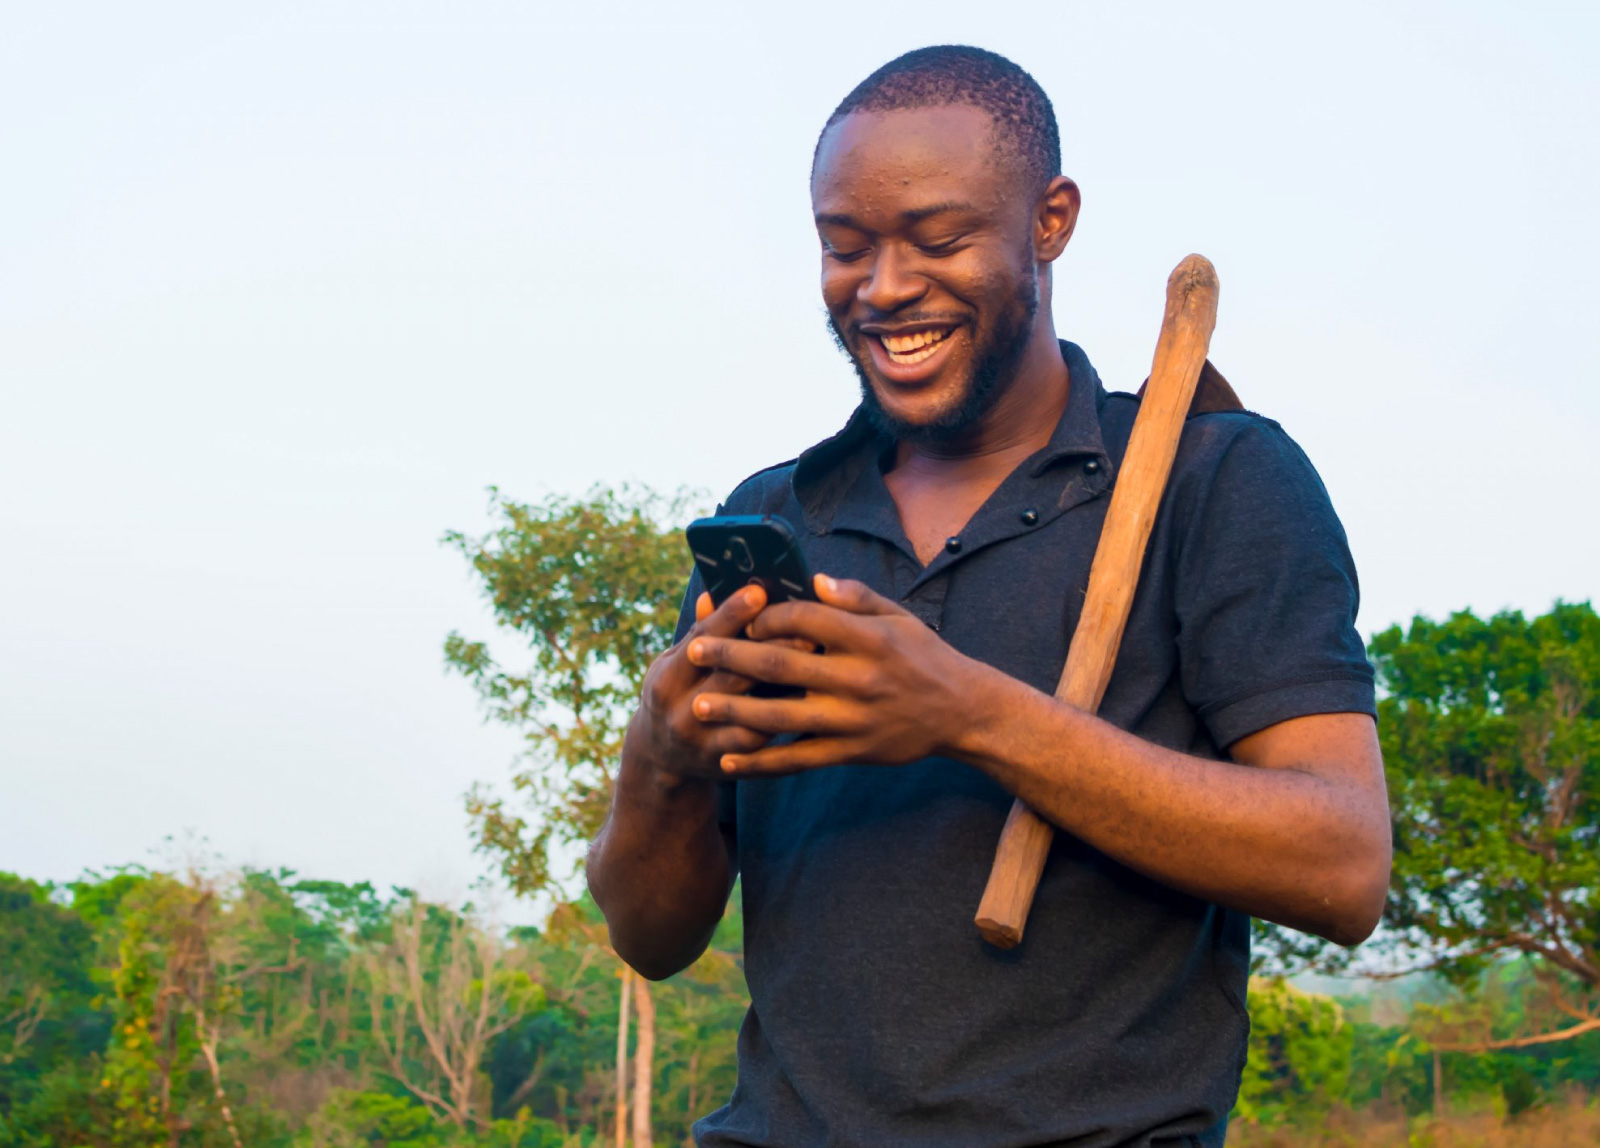 OMNIFARMERS – CONNECTING WITH FARMERS TO IMPROVE LIVELIHOODS AND INCREASE BUSINESS IMPACT